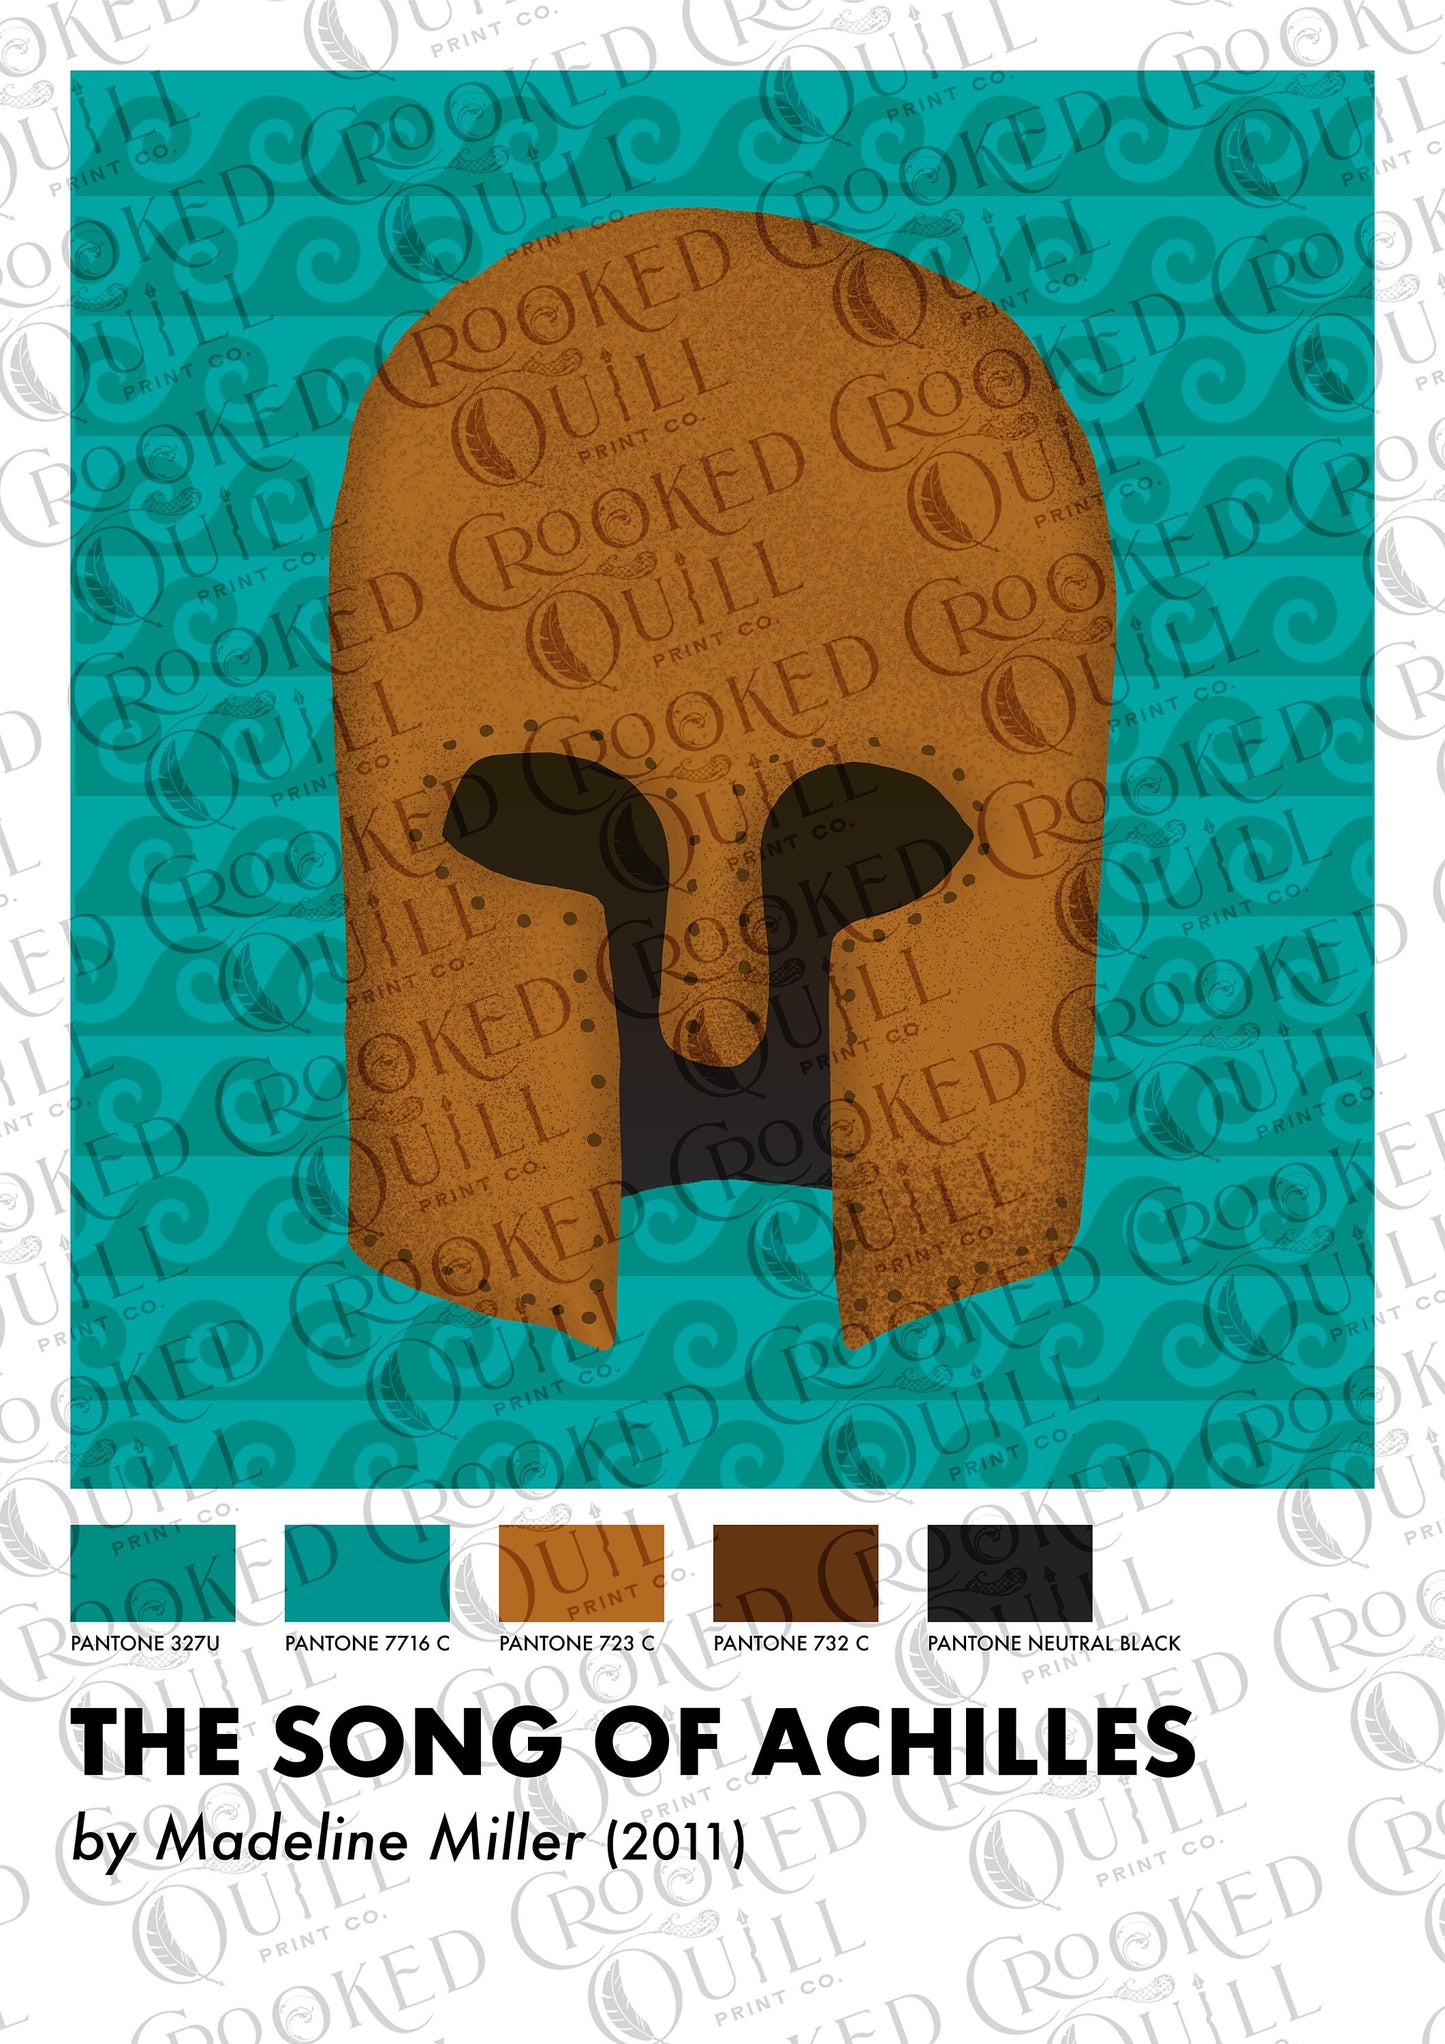 The Song of Achilles Inspired Art Print - The Pantone Collection